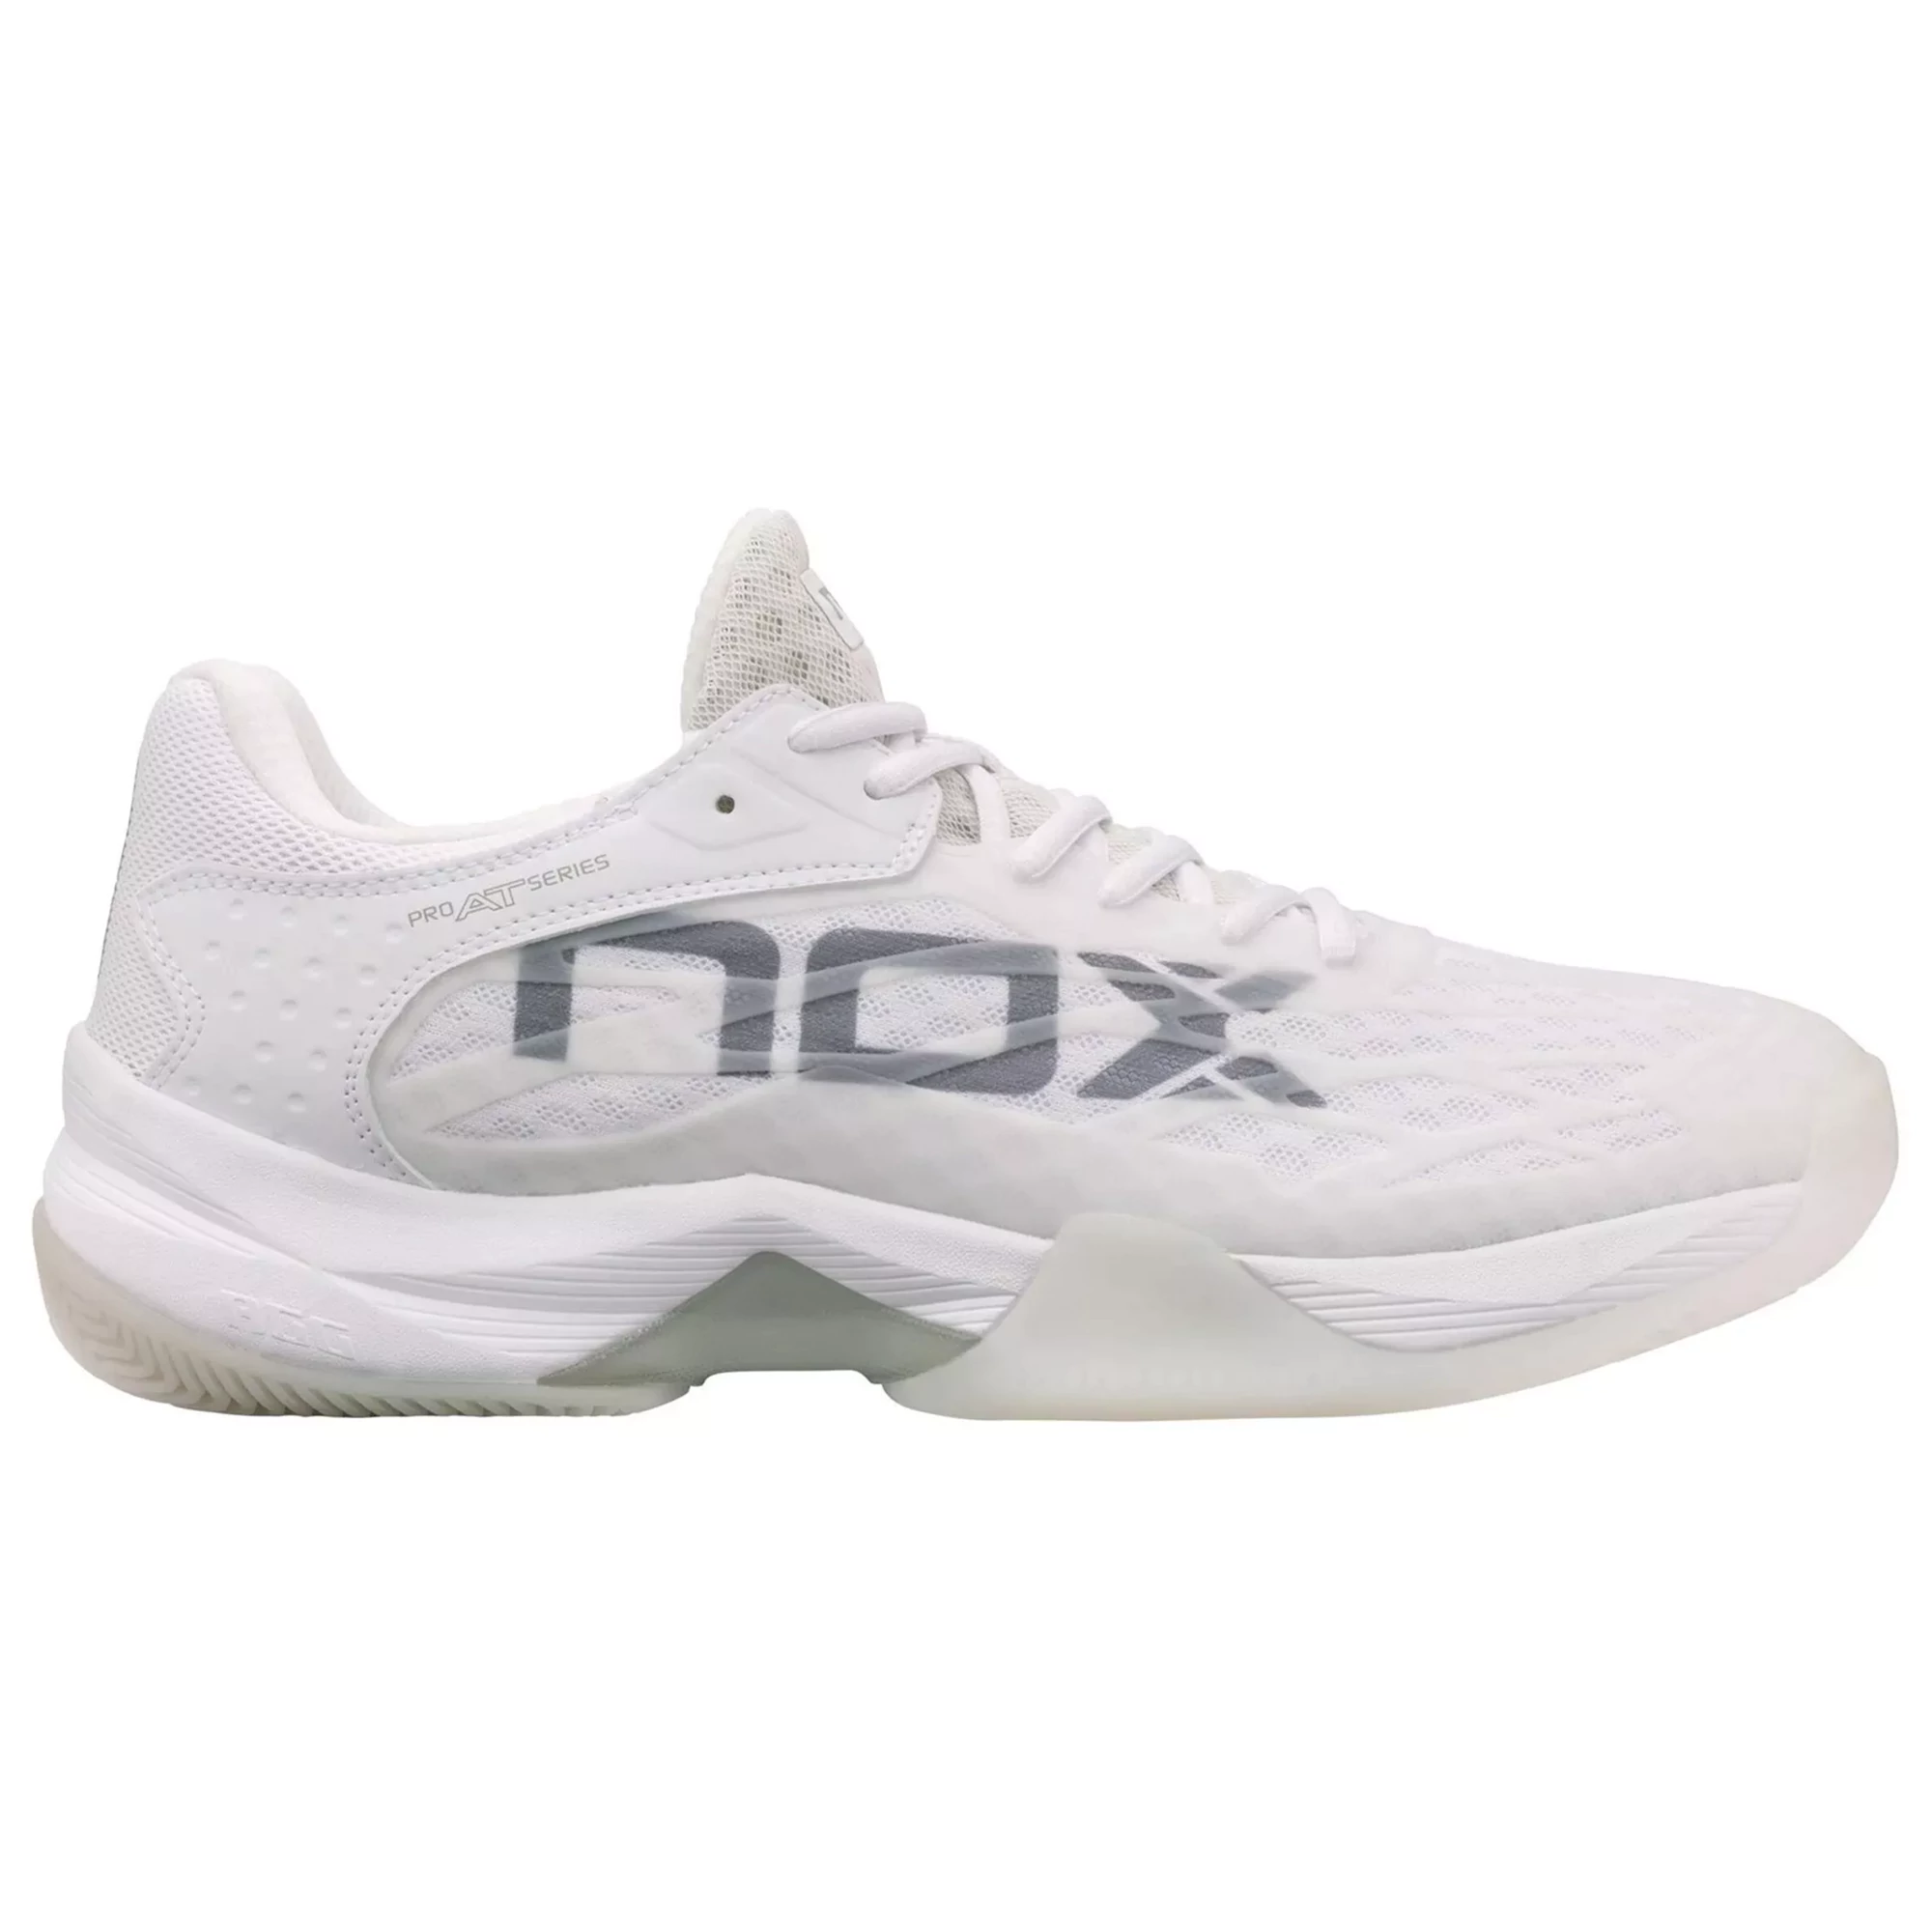 NOX Padel Shoes AT10 LUX White